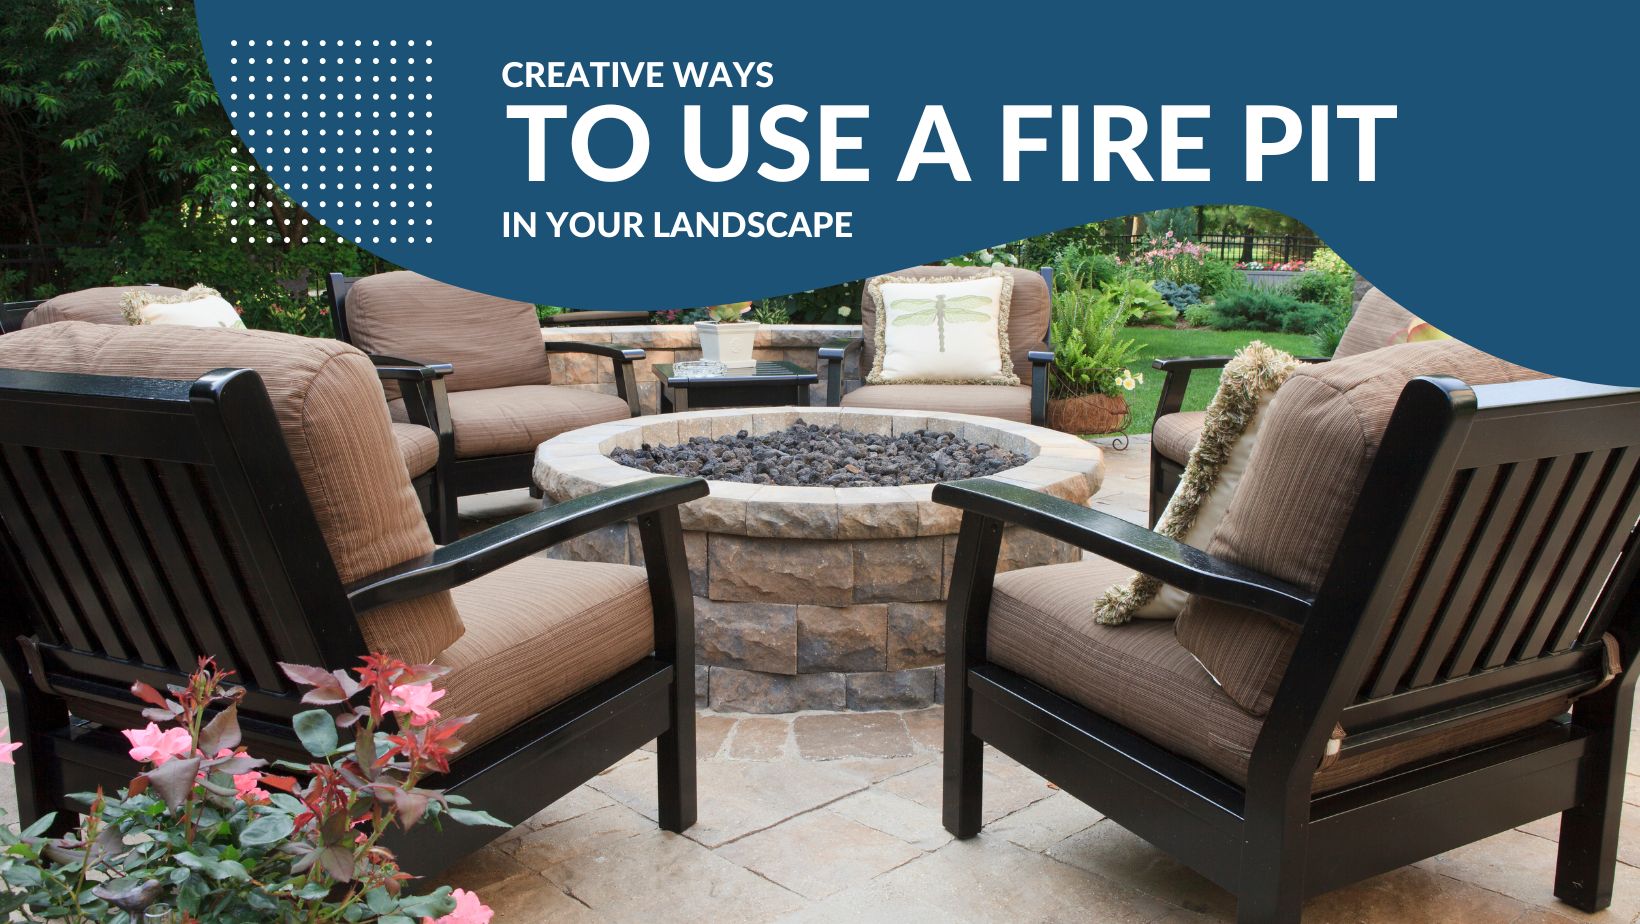 Creative Ways To Use A Fire Pit In Your Landscape